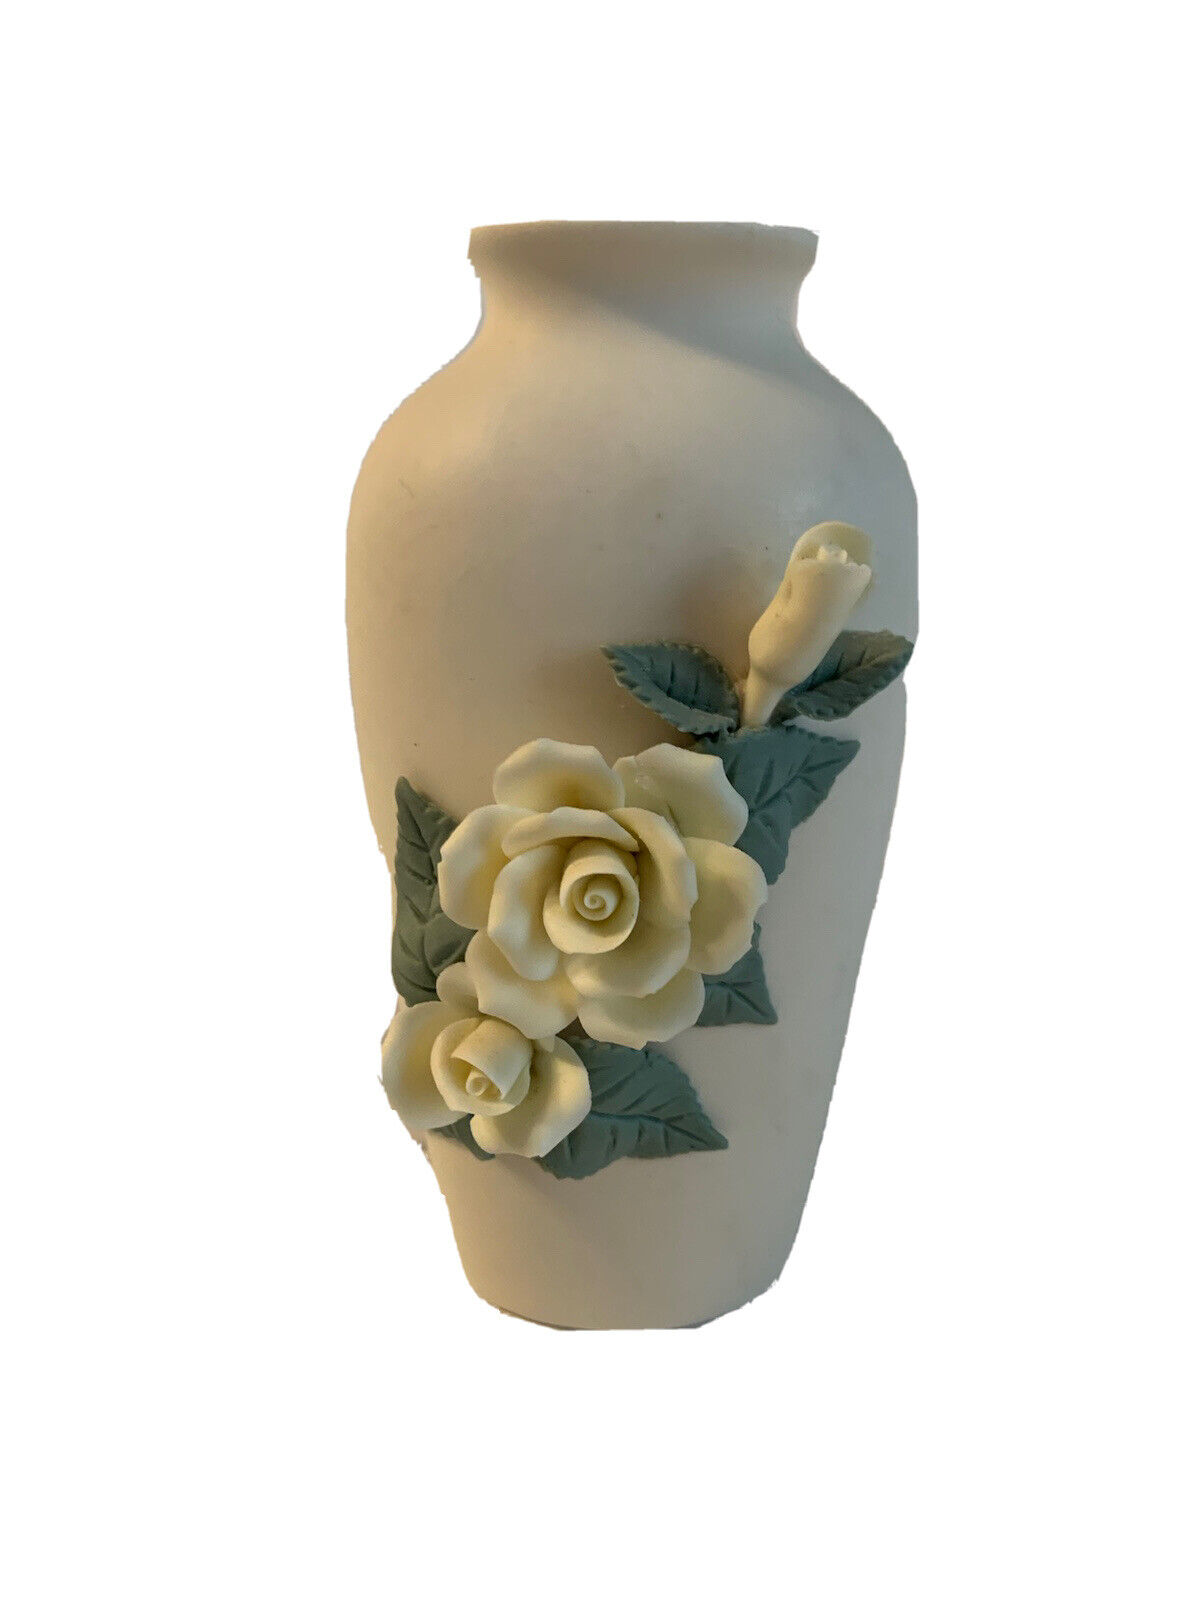 Vintage Applied Yellow Roses and Leaves Porcelain Bud Vase White & Yellow Flower